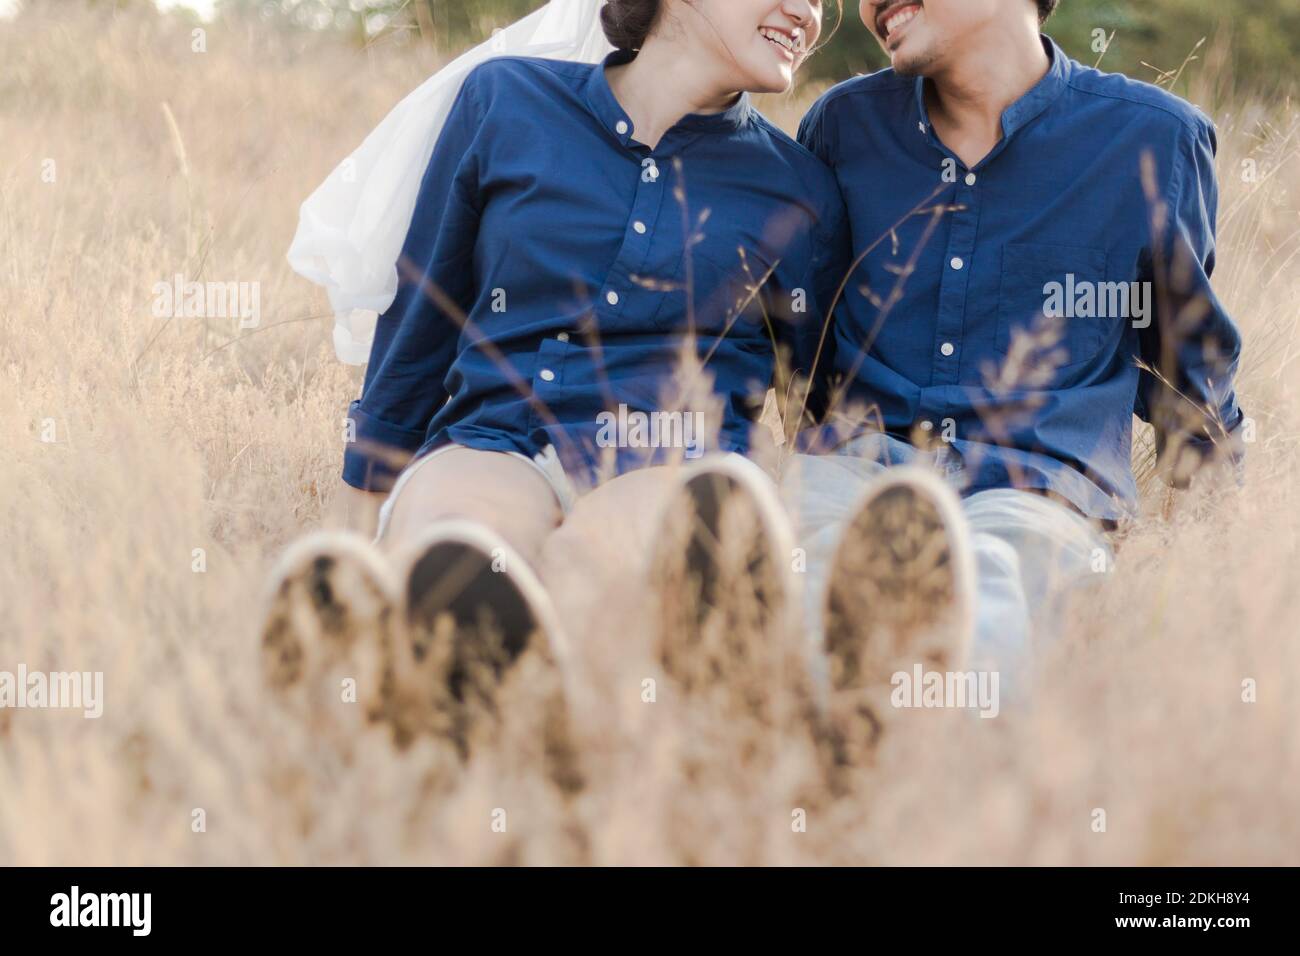 Low Section Of Couple Sitting On Grassy Field Stock Photo